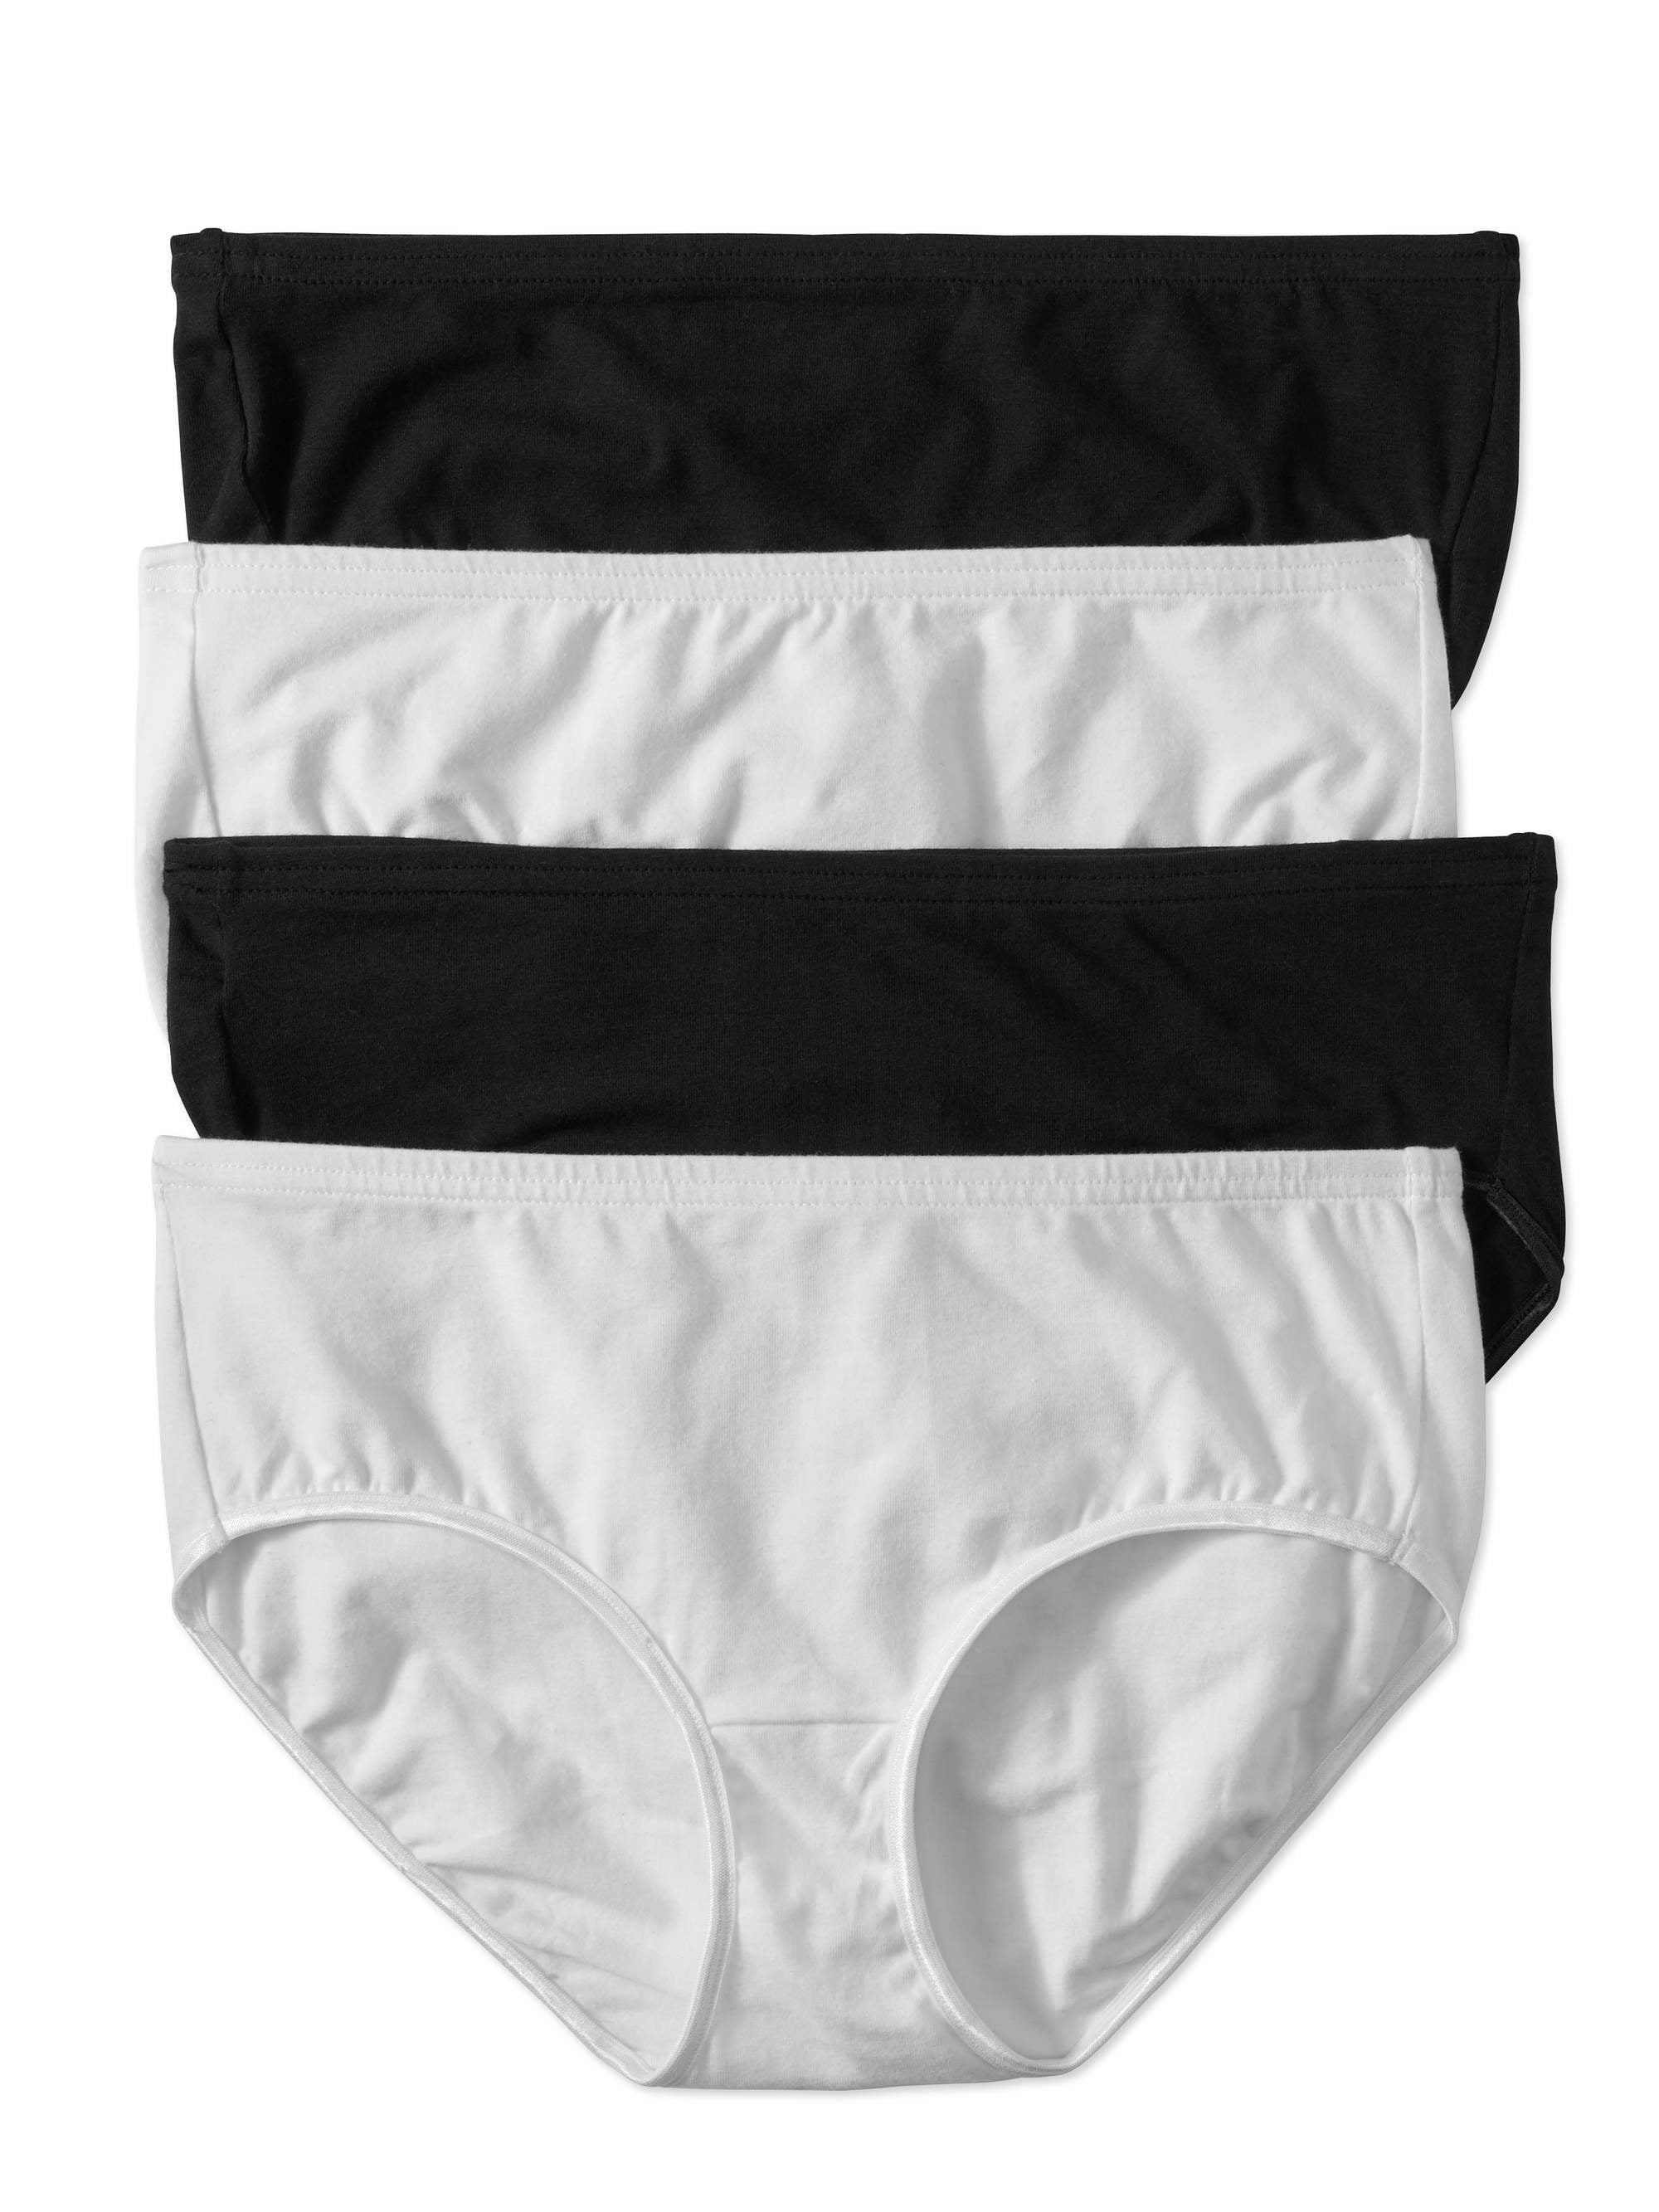 Best fitting panty women's cotton stretch brief panty, 4-pack 